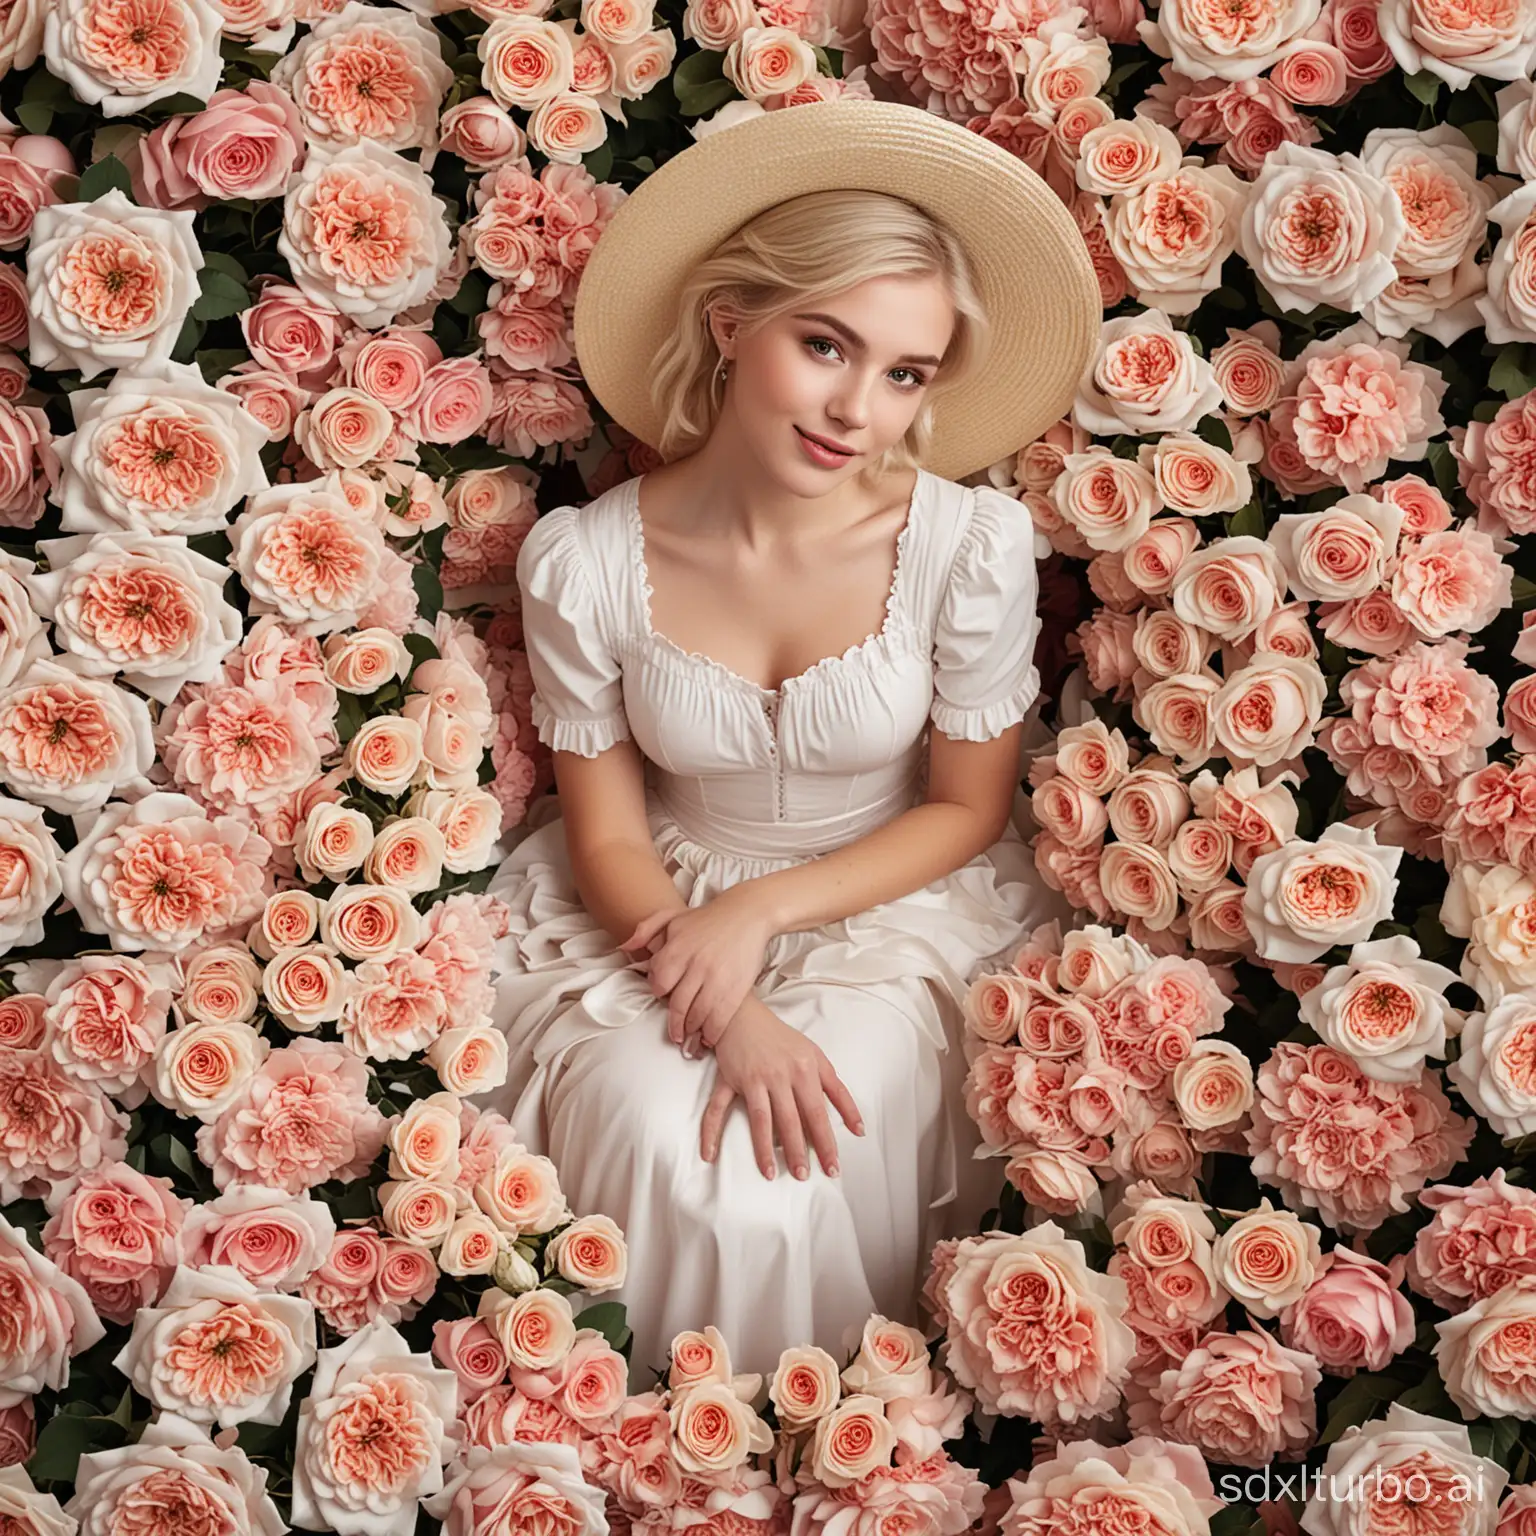 A white-skinned girl surrounded by bouquets in hatboxes with roses